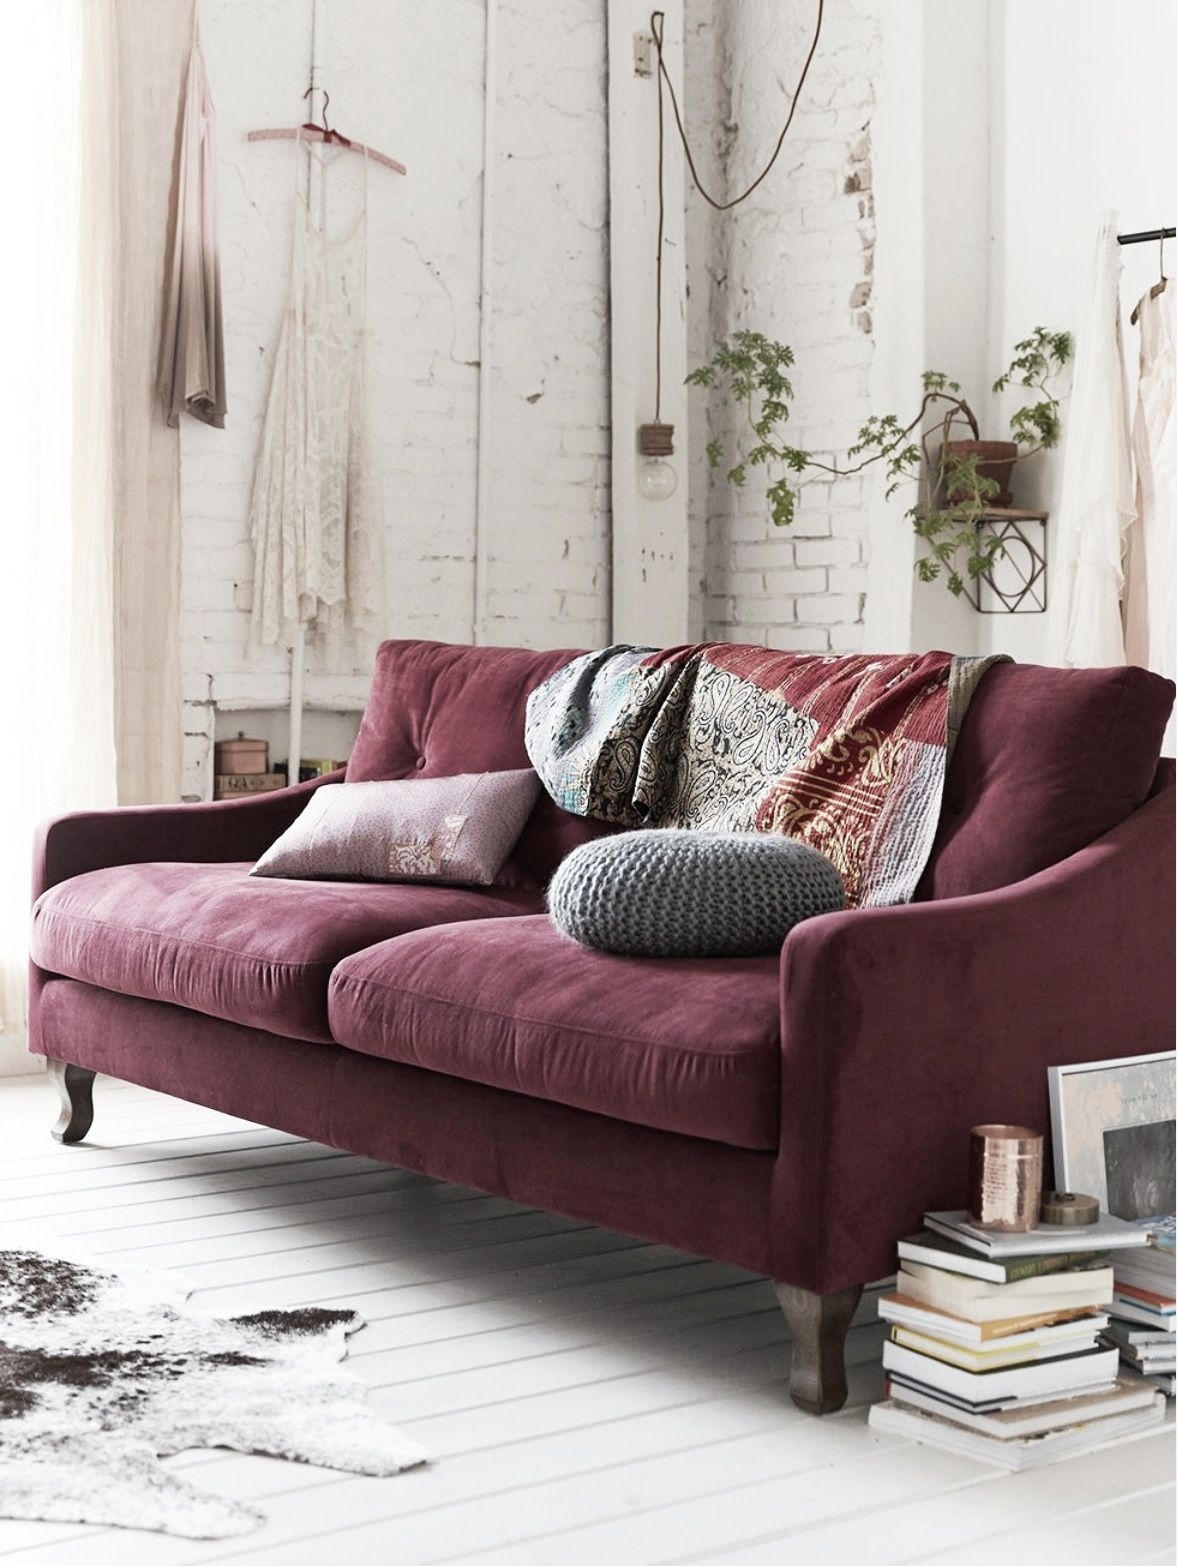 Plum colored couch